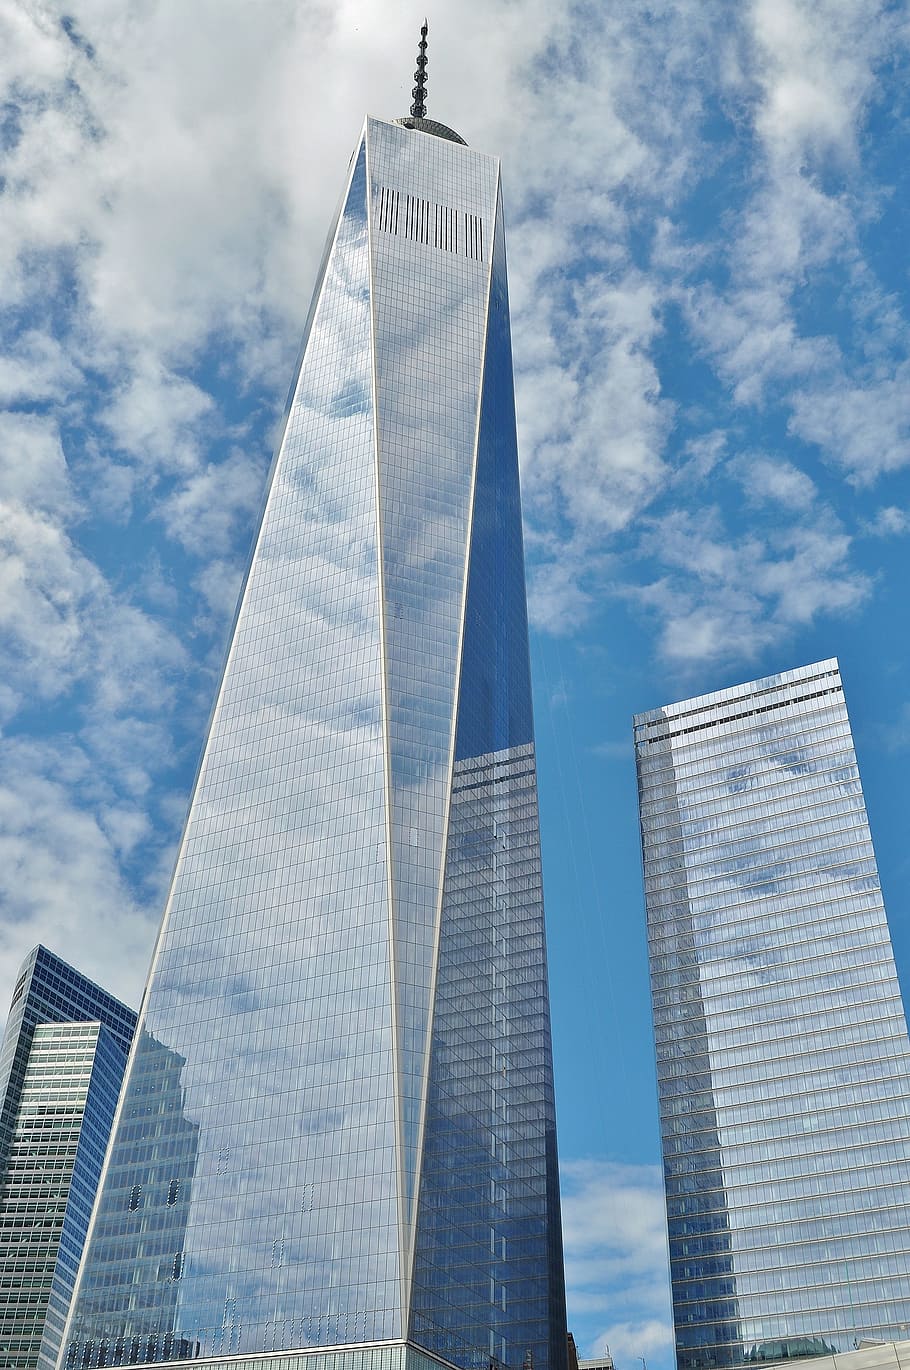 glass, high-rise, building, daytime, one world trade center, manhattan, owtc, new york, architecture, downtown